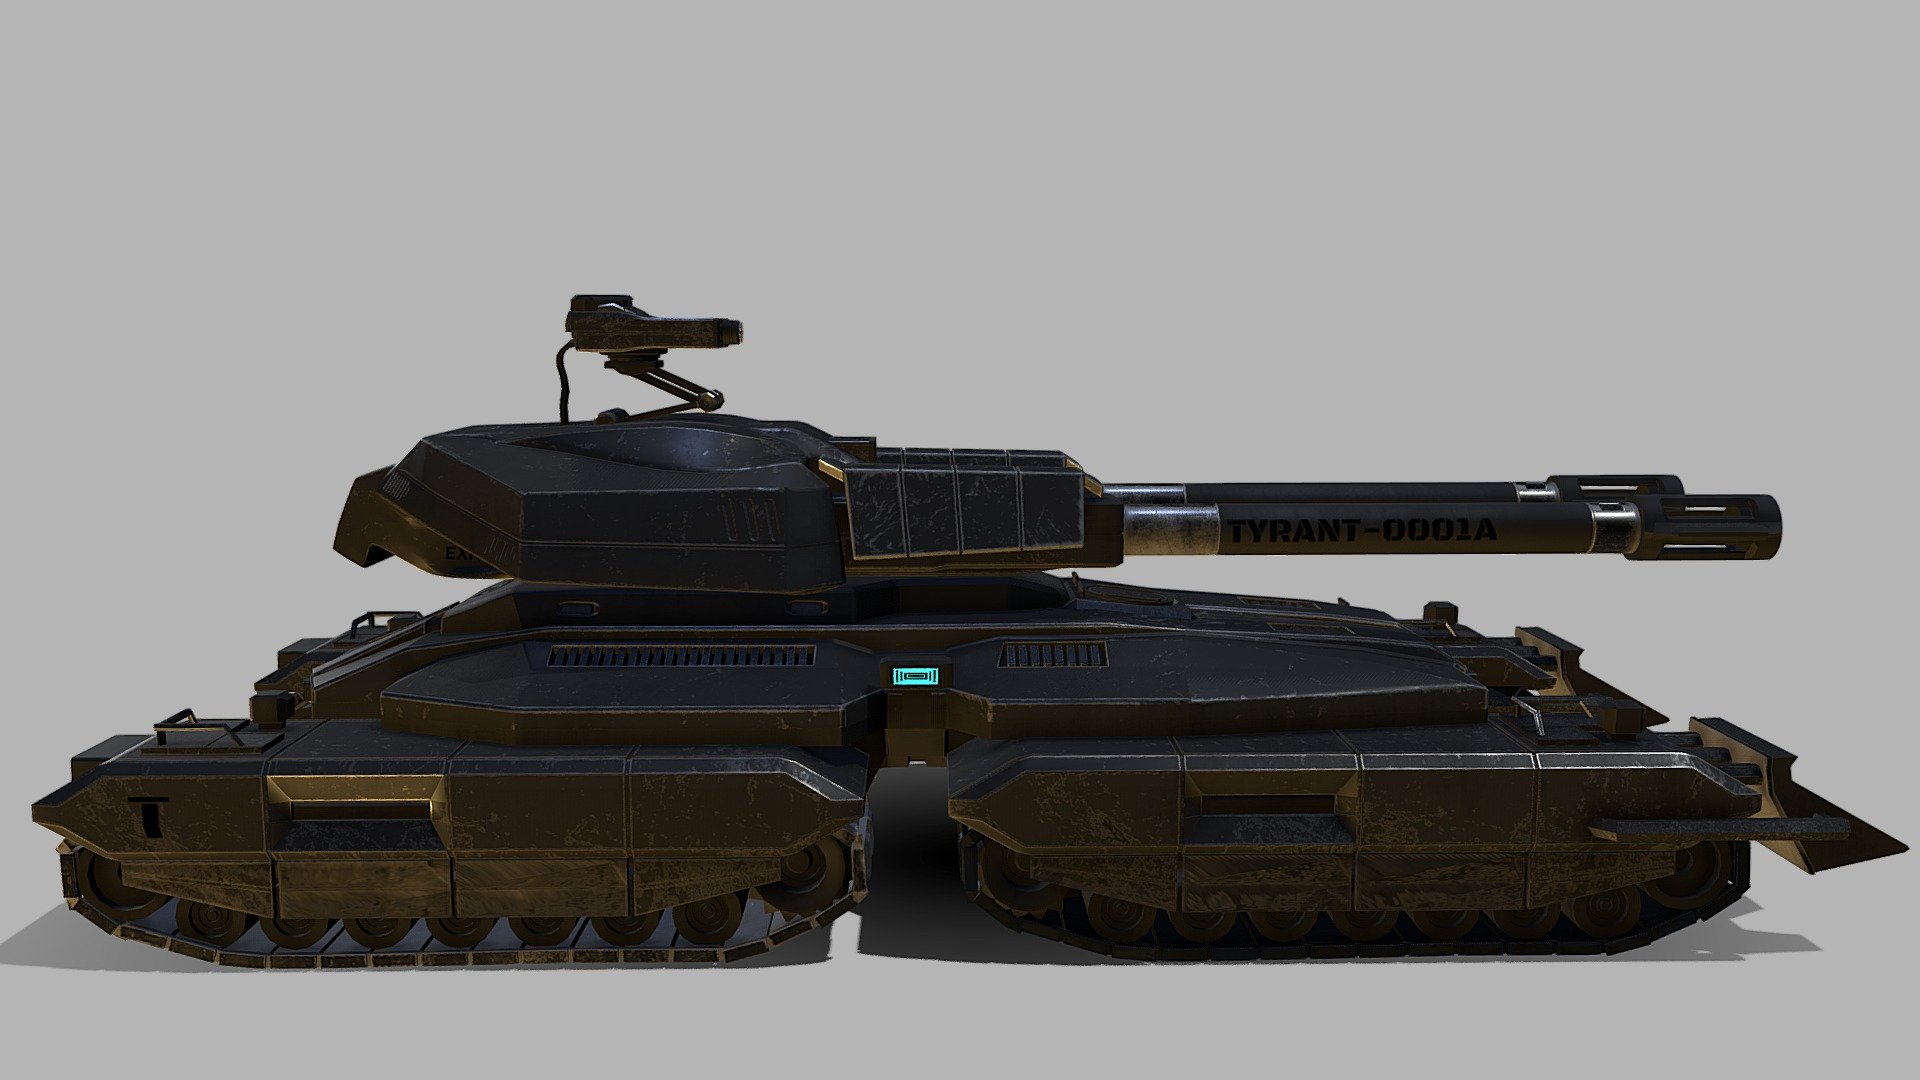 Tank from a non-profit personal project. aka: https://www.youtube.com/watch?v=2LjIVD1fVHU

This design is my own concept (BasedOptimal), does not repeat any existing work. You can use it without a doubt about copyright 3d model